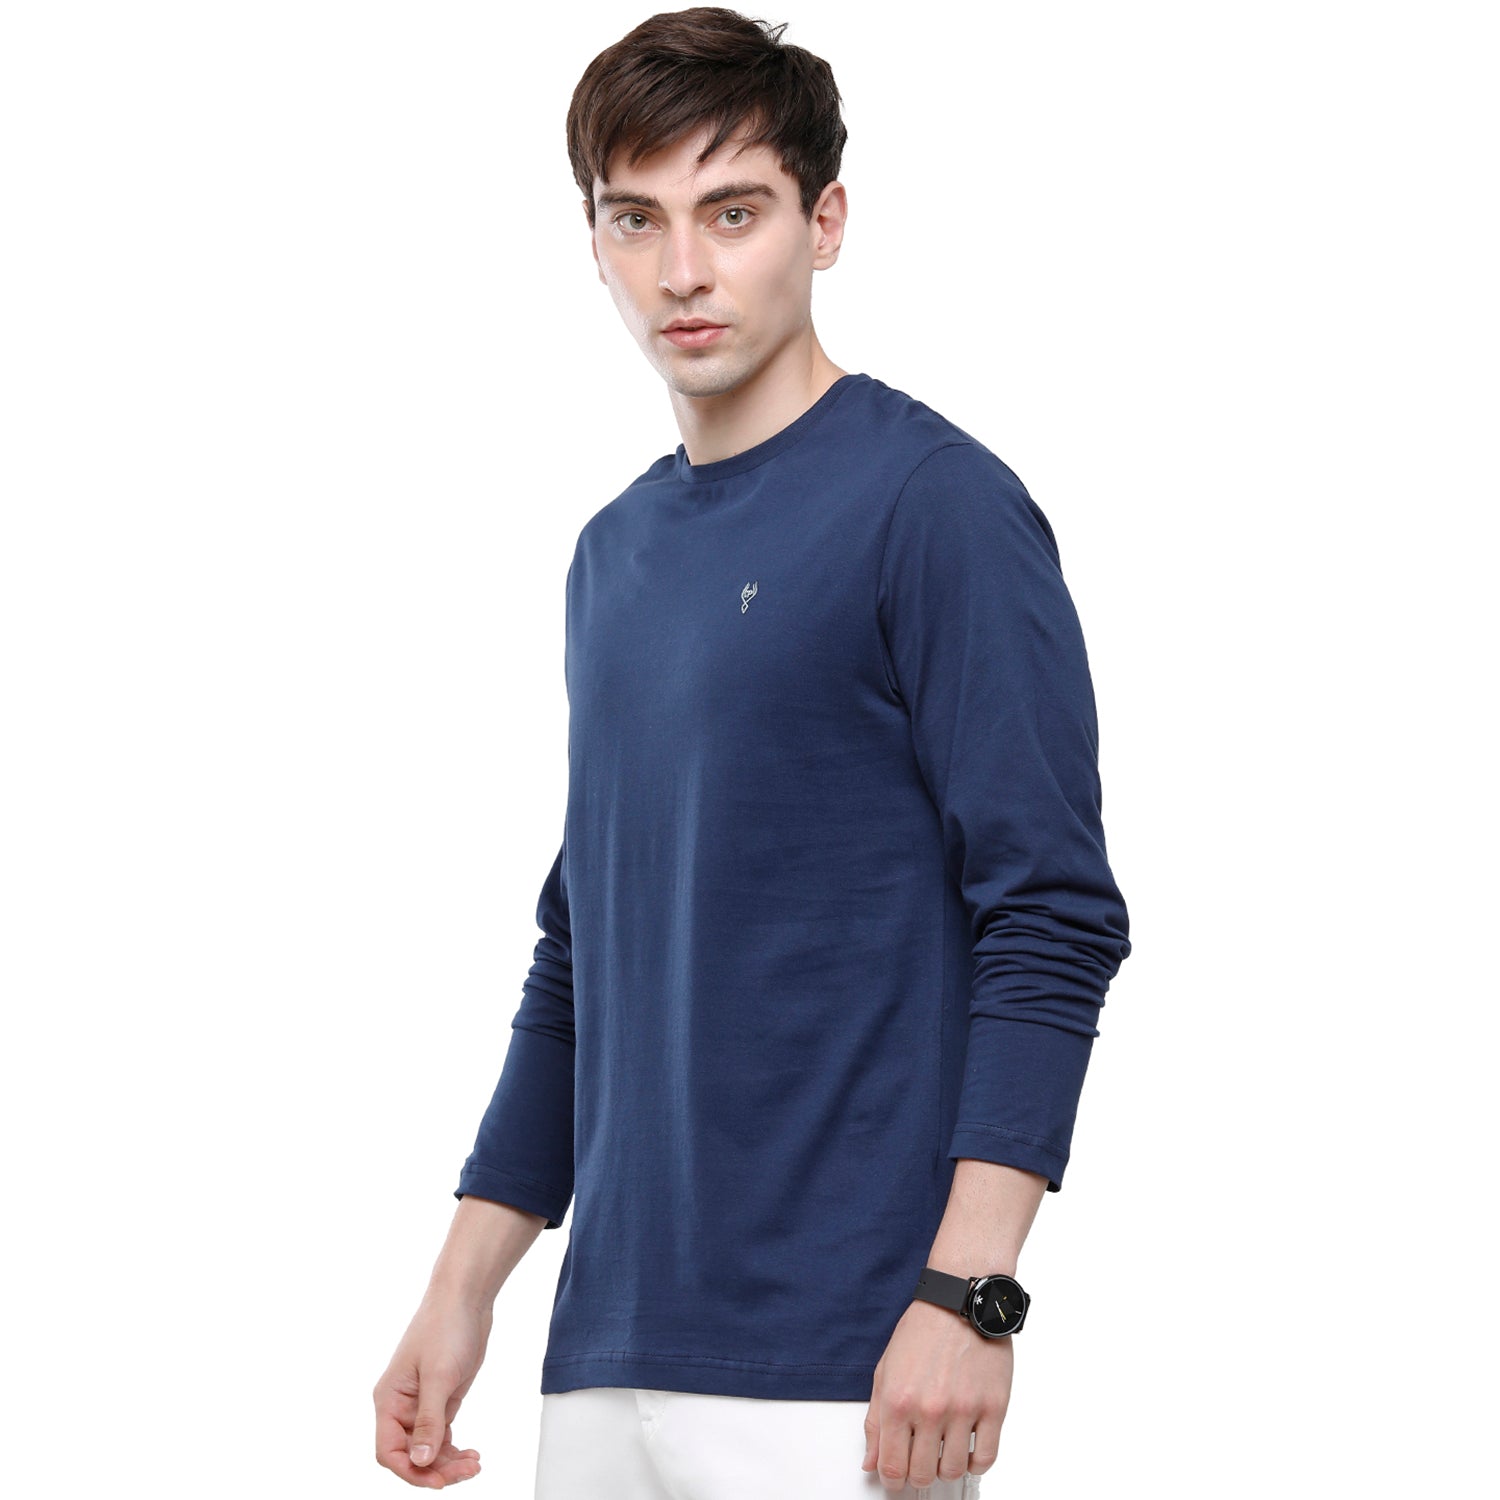 Classic polo Men's Blue Single Jersey Crew Neck Full Sleeve Slim Fit T-Shirt - Comet - 04 T-shirt Classic Polo 